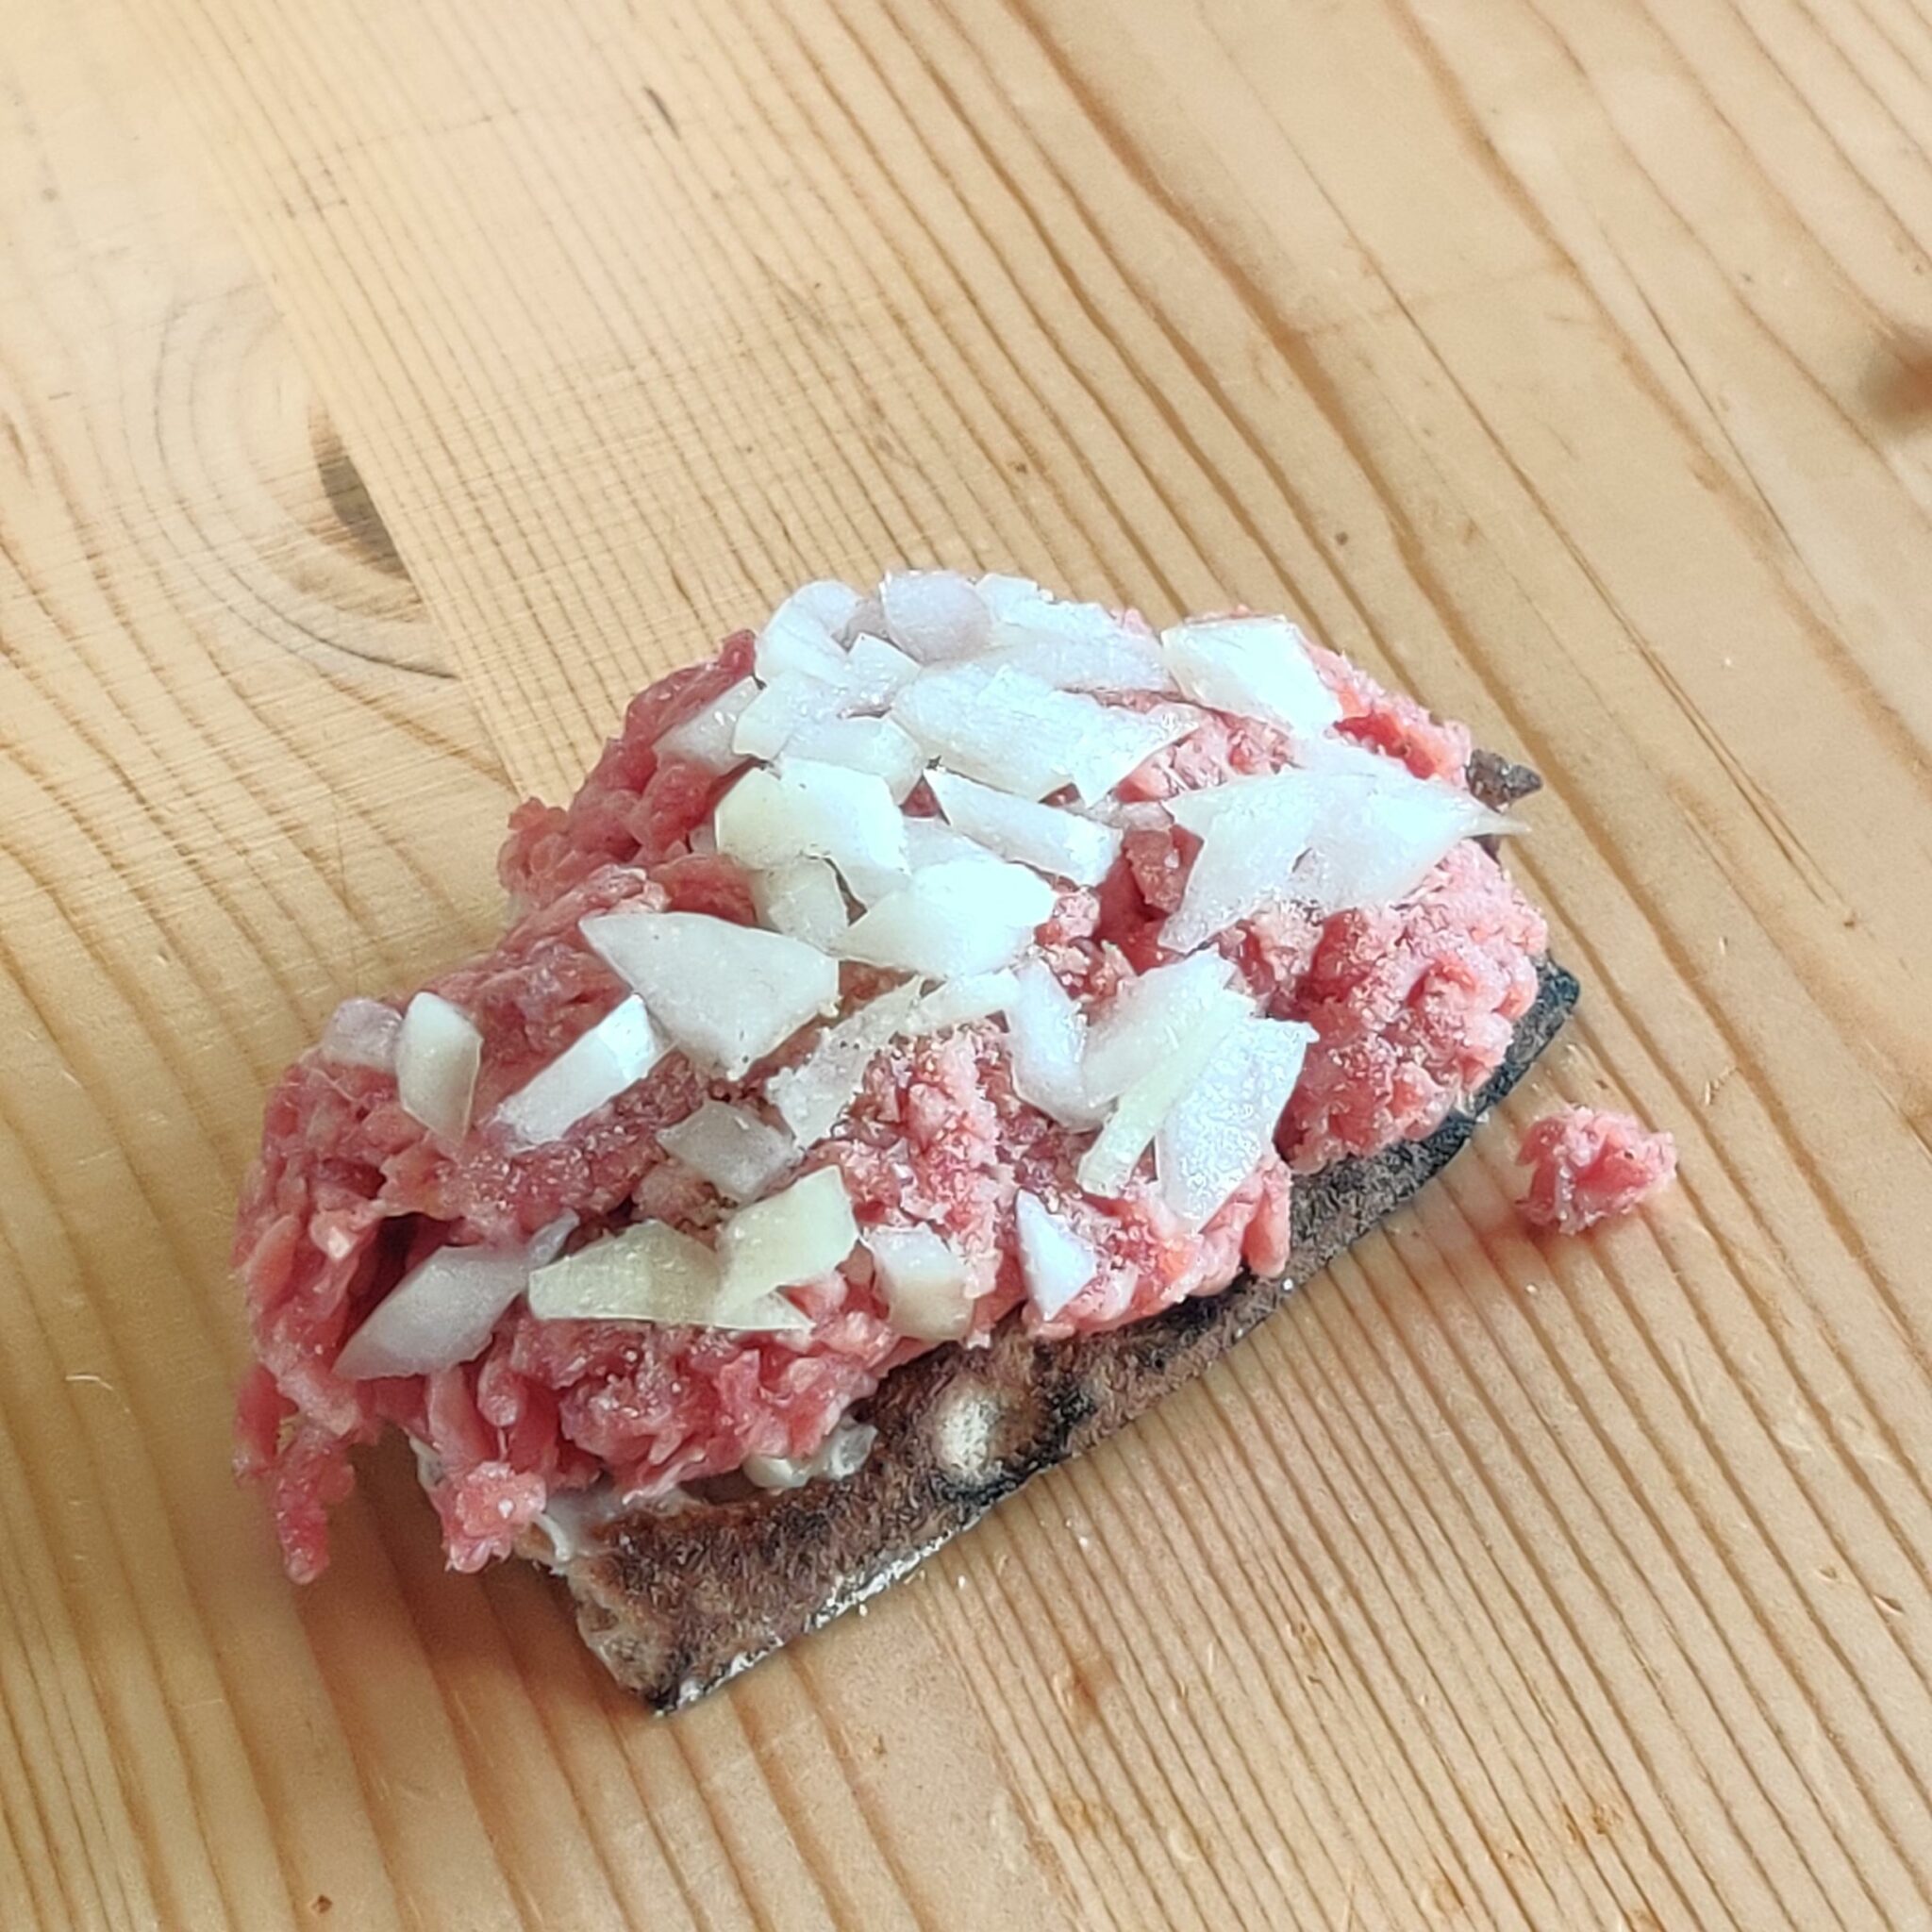 Raw Onions On Raw Hamburger Meat (not recommended)